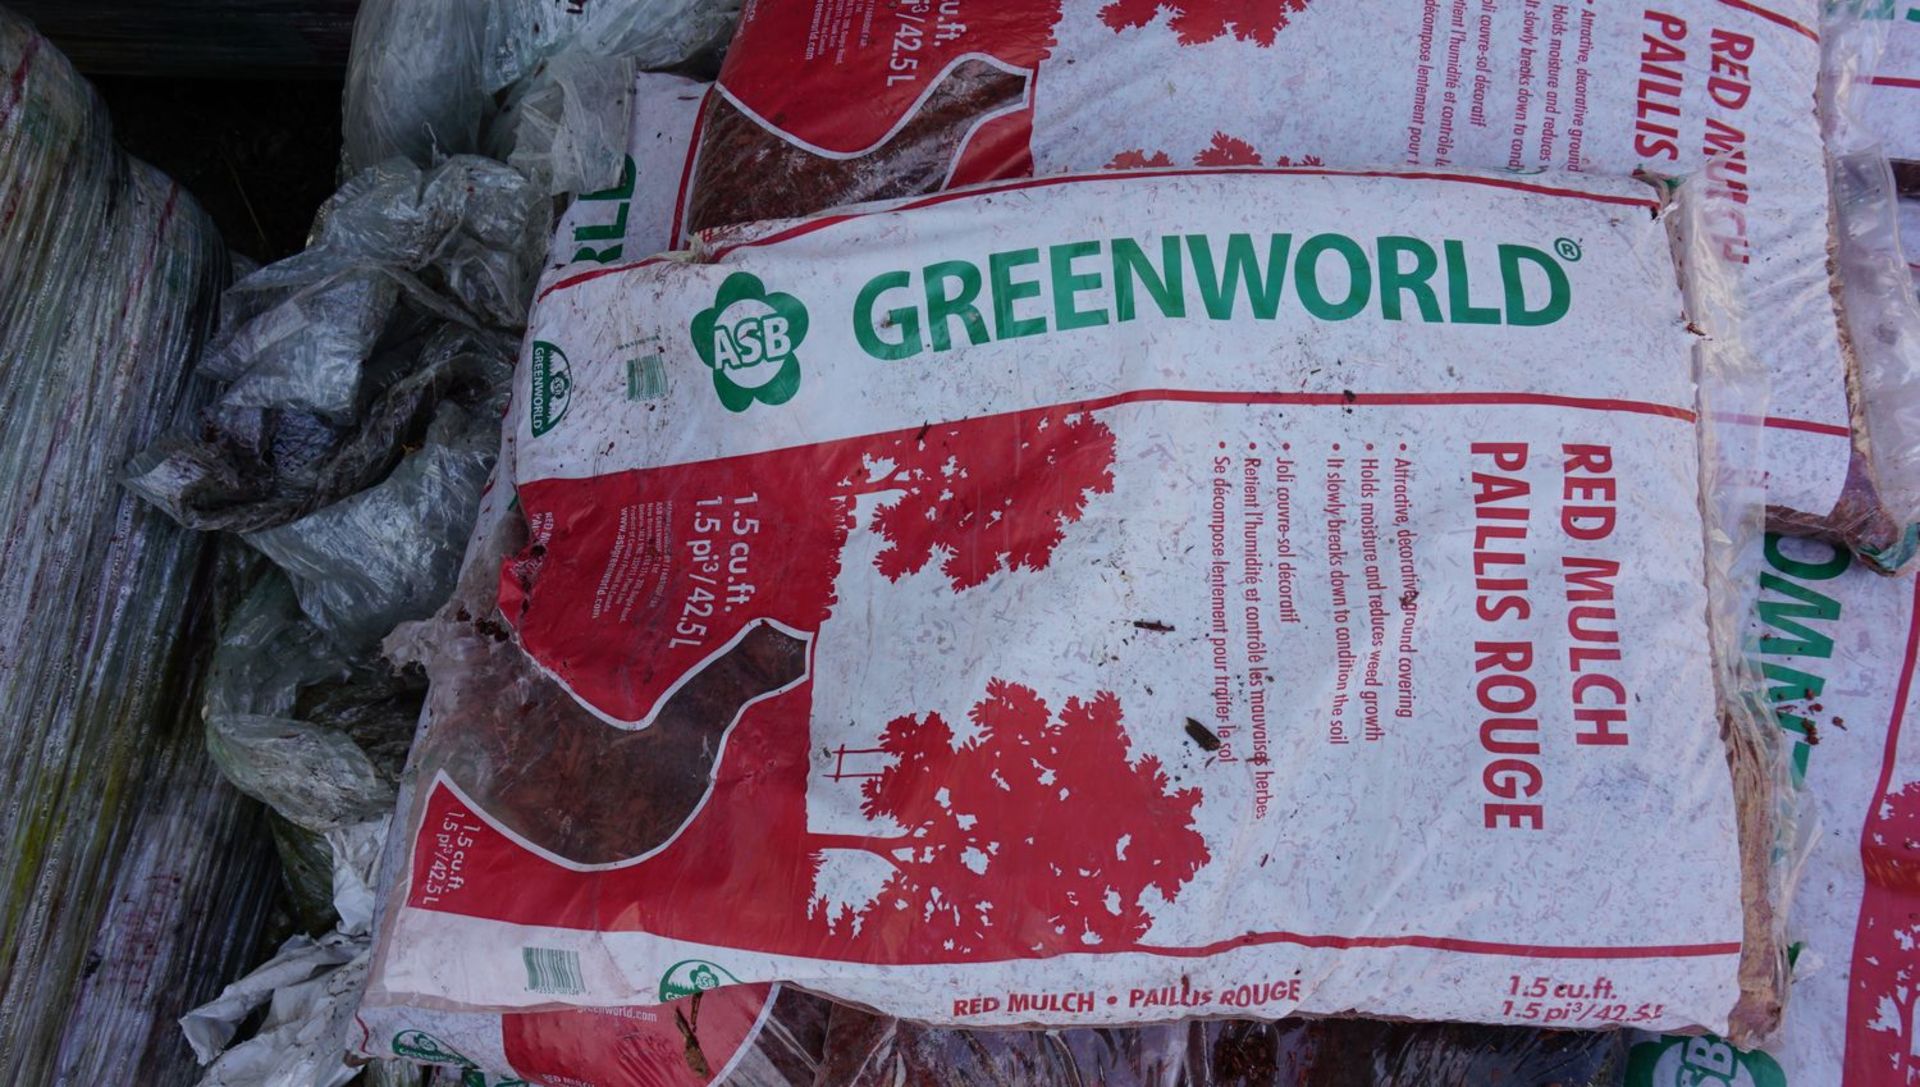 LOT - ASB GREENWORLD RED GARDEN MULCH (42.5L / BAG) (50 BAGS) - Image 2 of 2